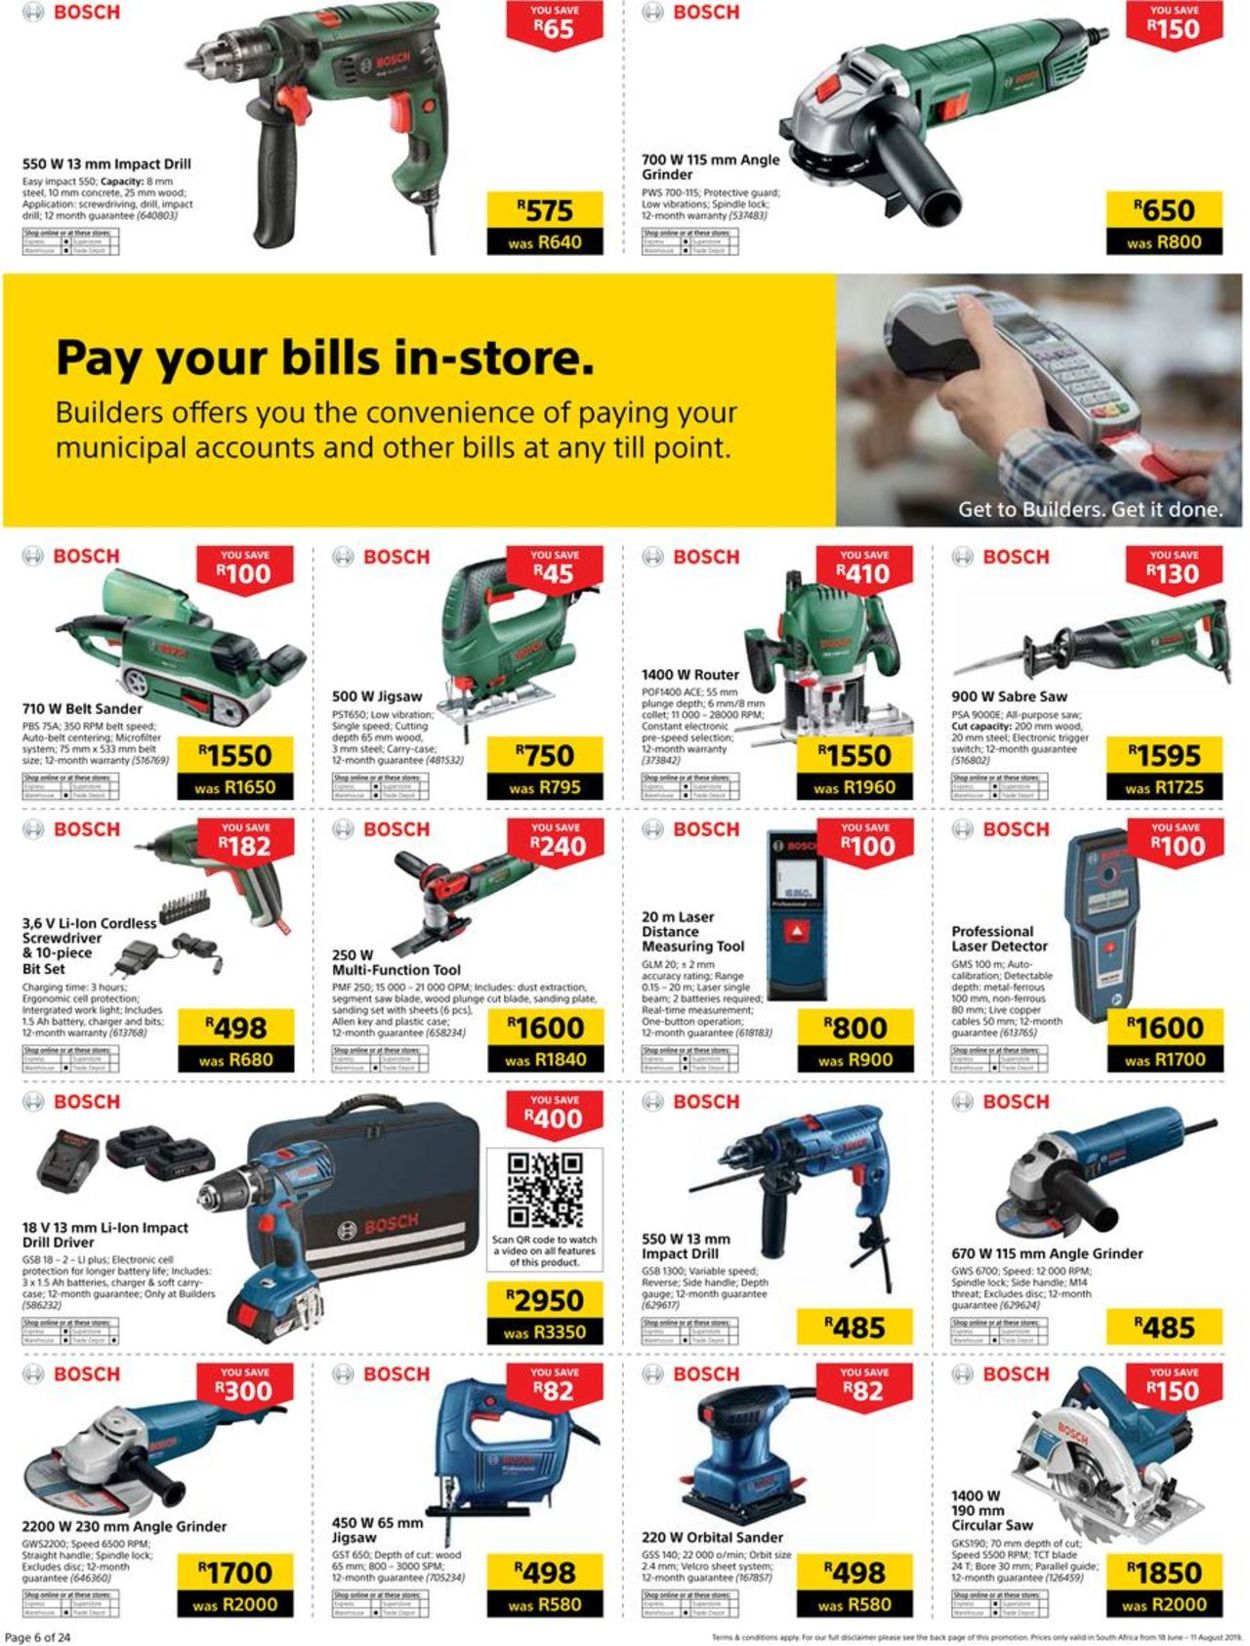 Builders Warehouse Catalogue from 2019/06/18